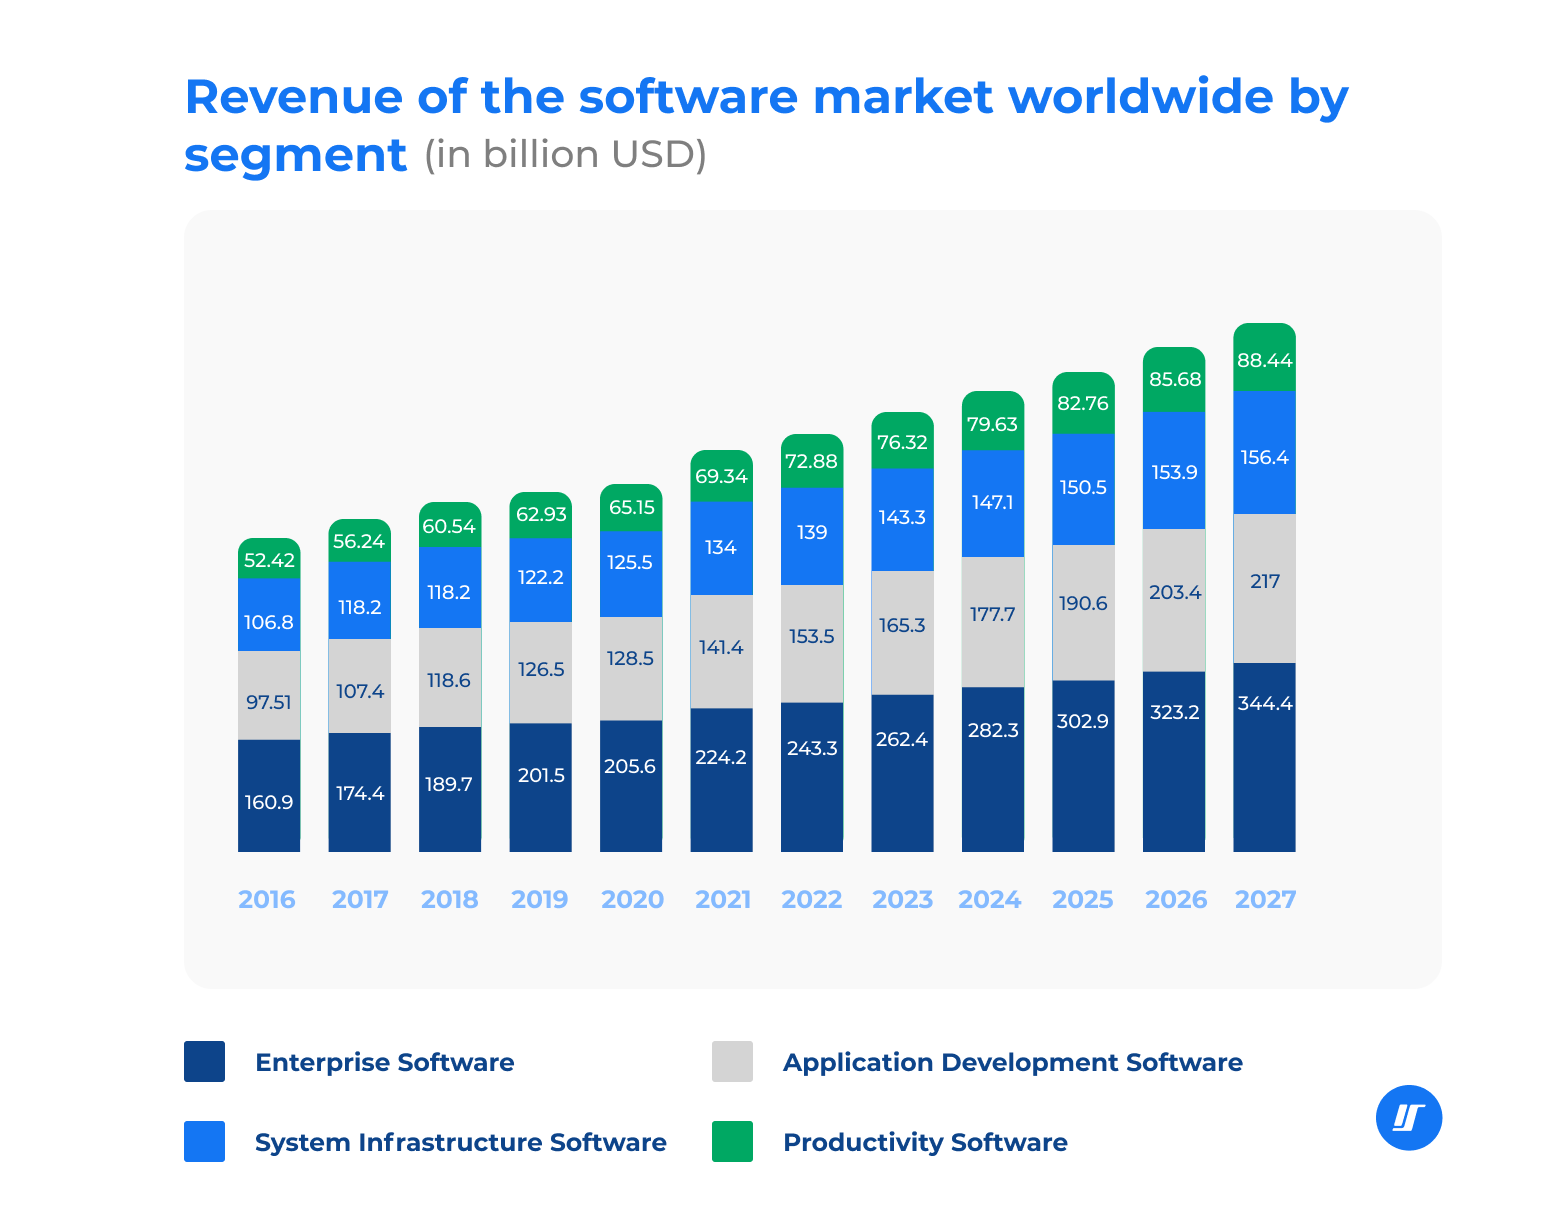 Revenue of the software market worldwide from 2016 to 2027, by segment.